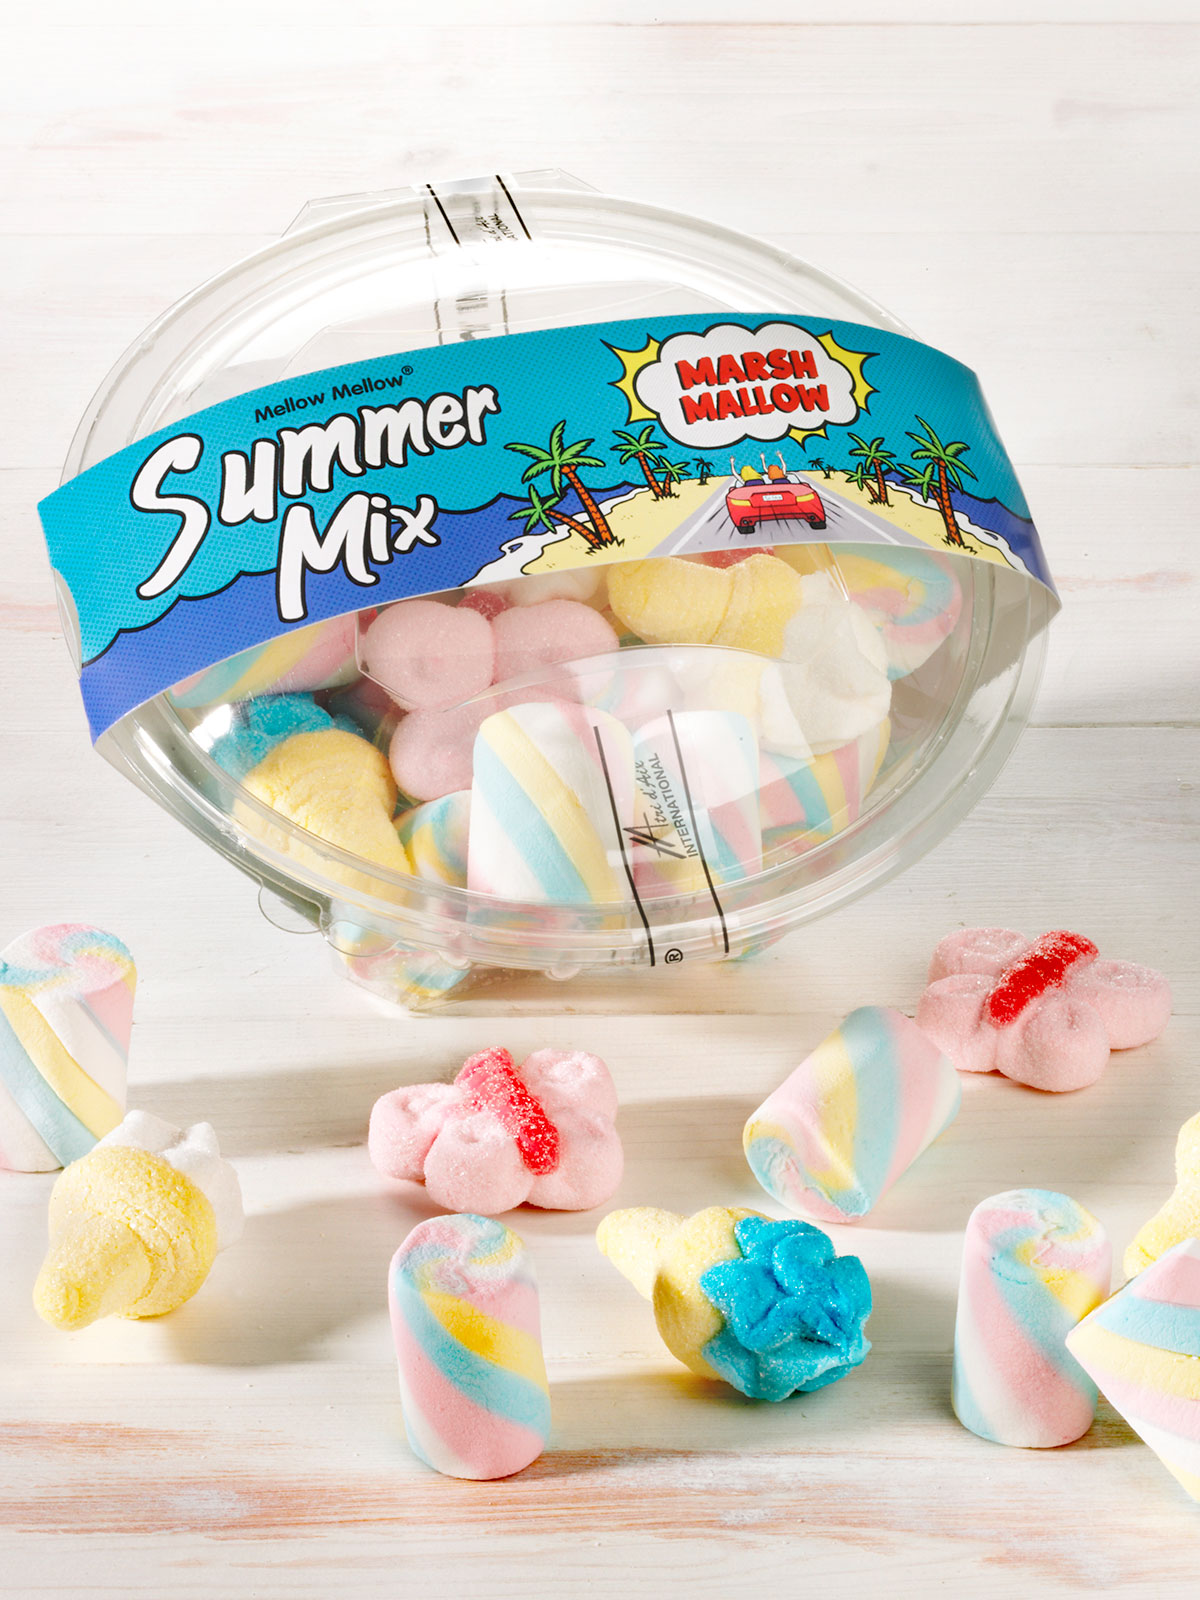 Marshmallow „Sommer Mix“